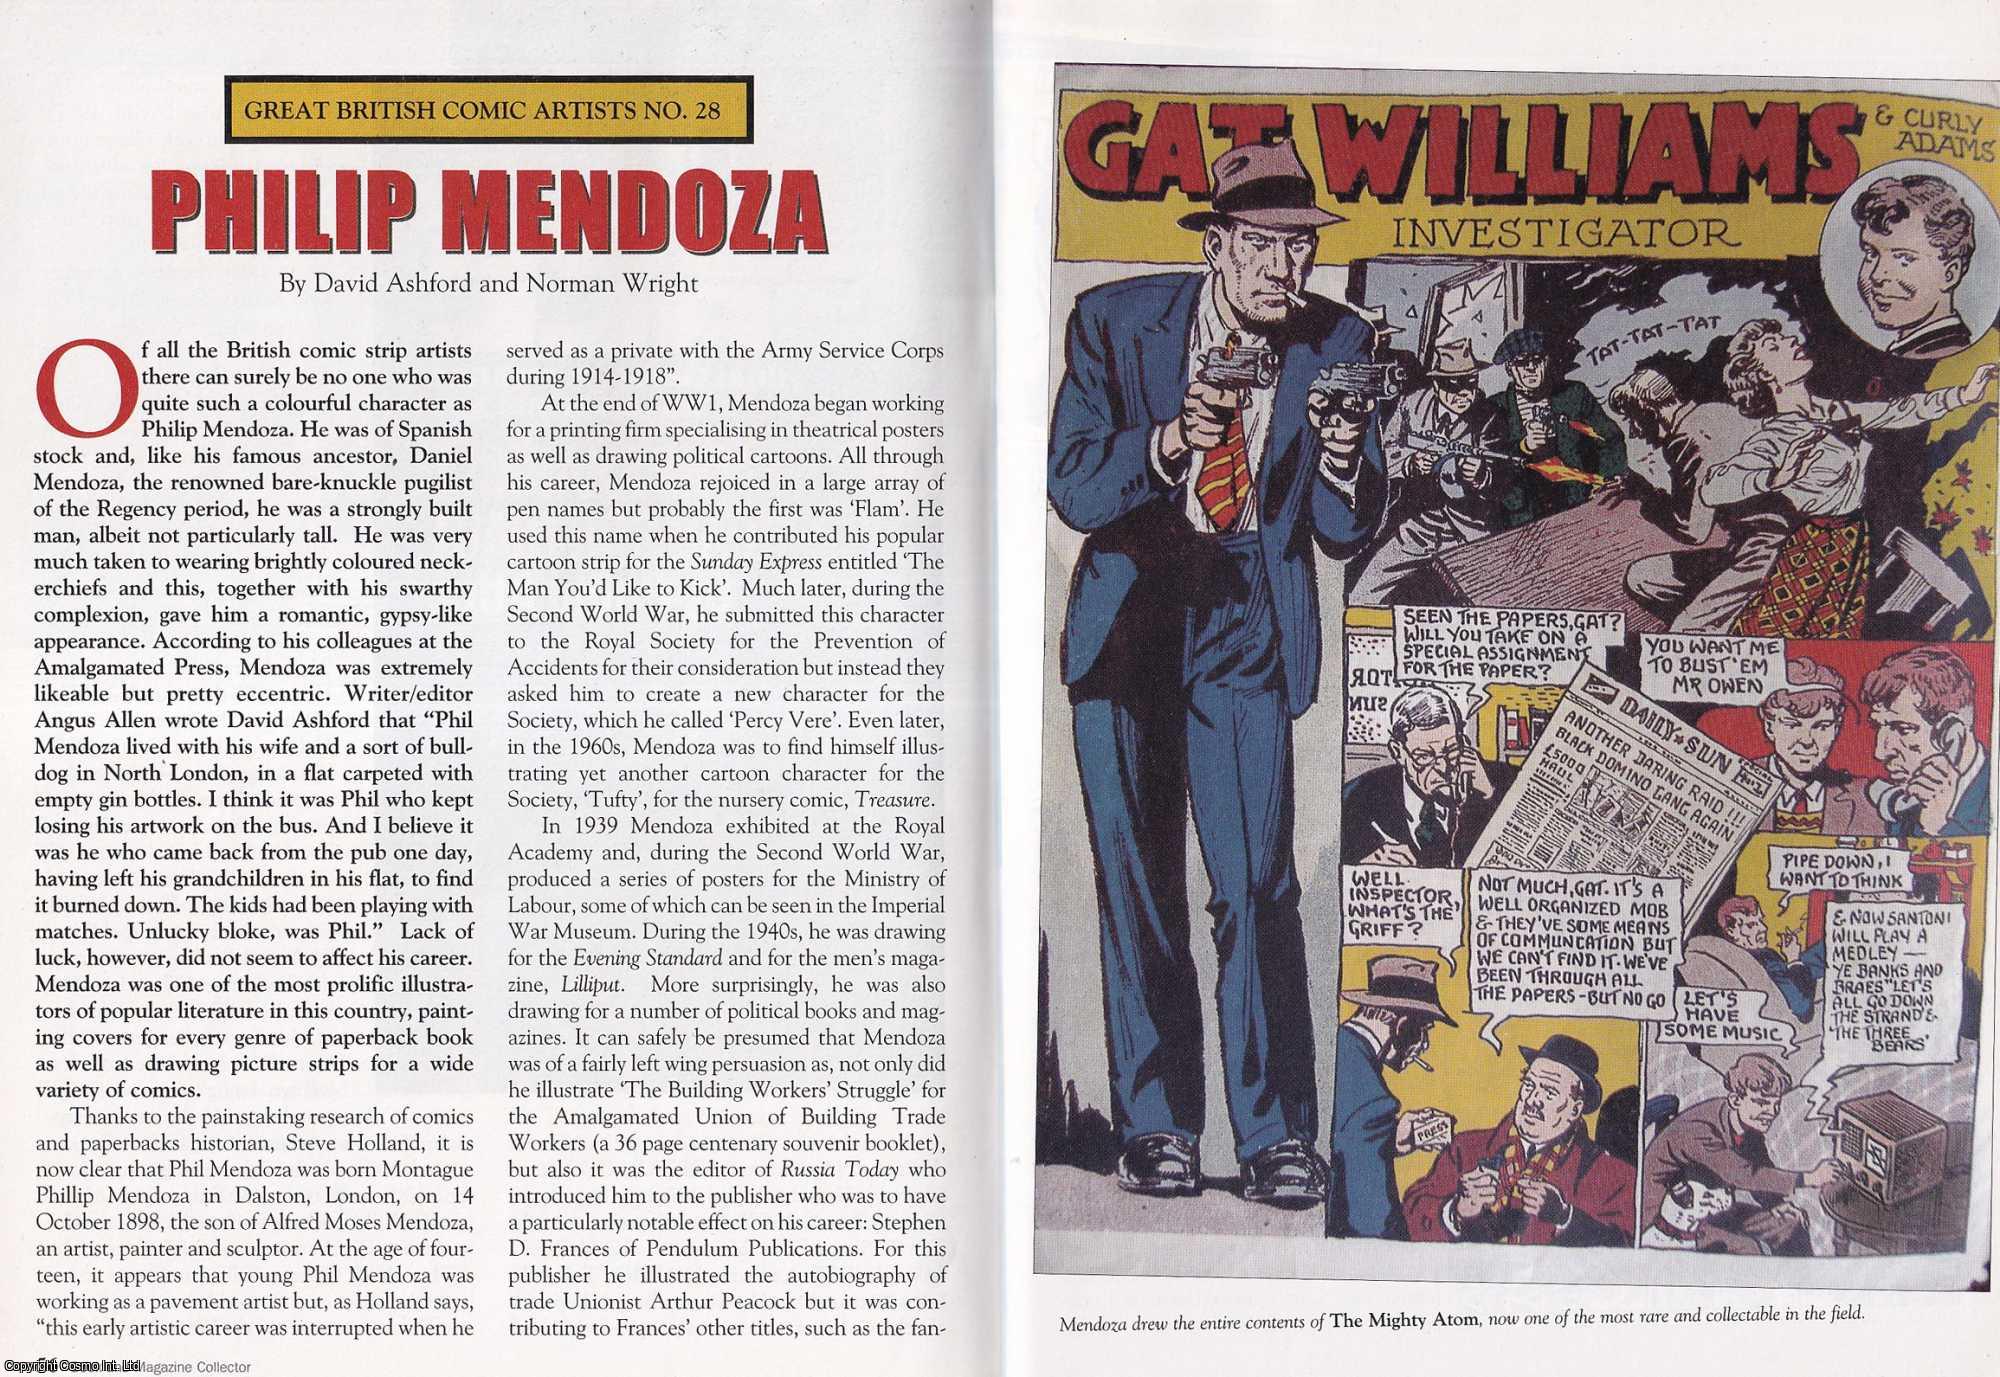 Norman Wright & David Ashford - Philip Mendoza. Great British Comic Artist. This is an original article separated from an issue of The Book & Magazine Collector publication.